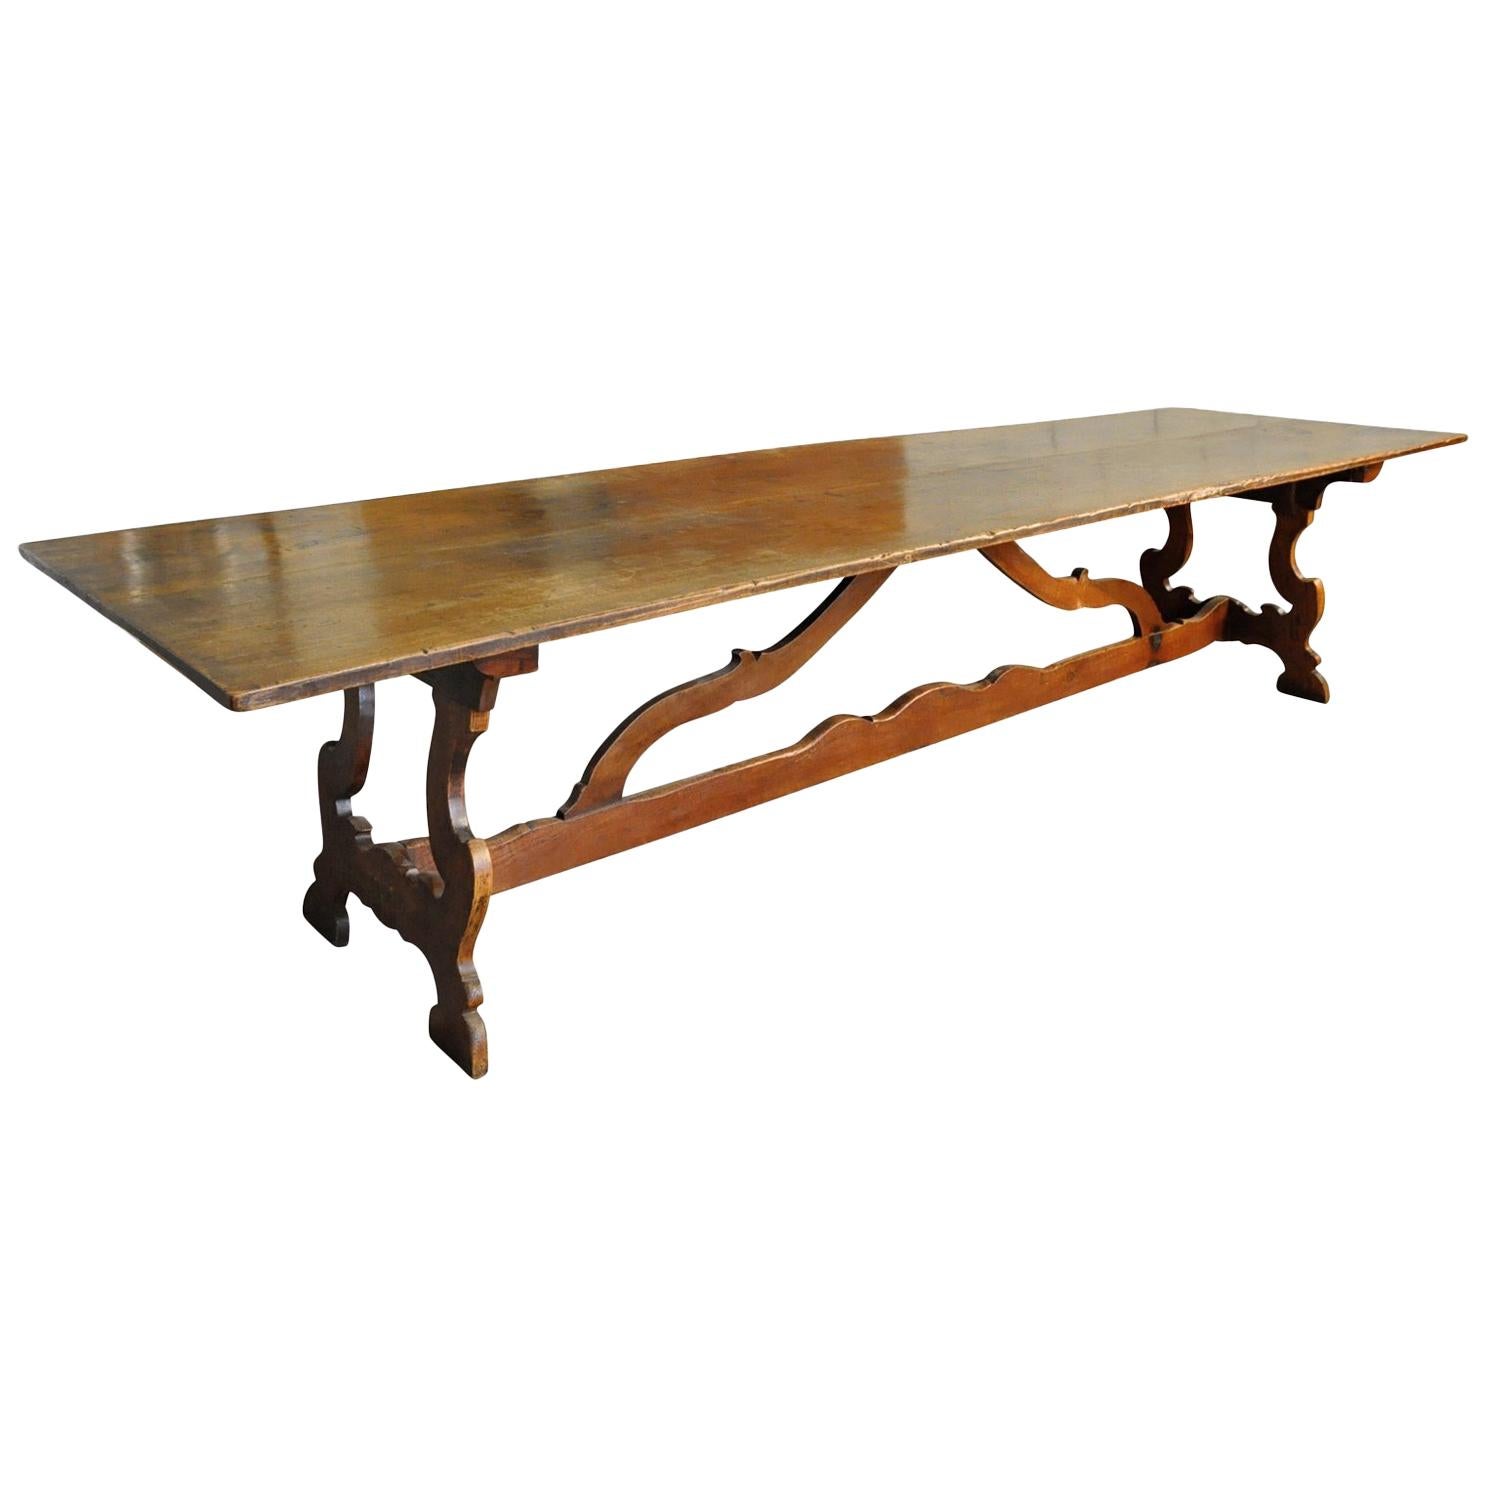 Exceptional and Grand Scale 18th Century Italian Dining Table